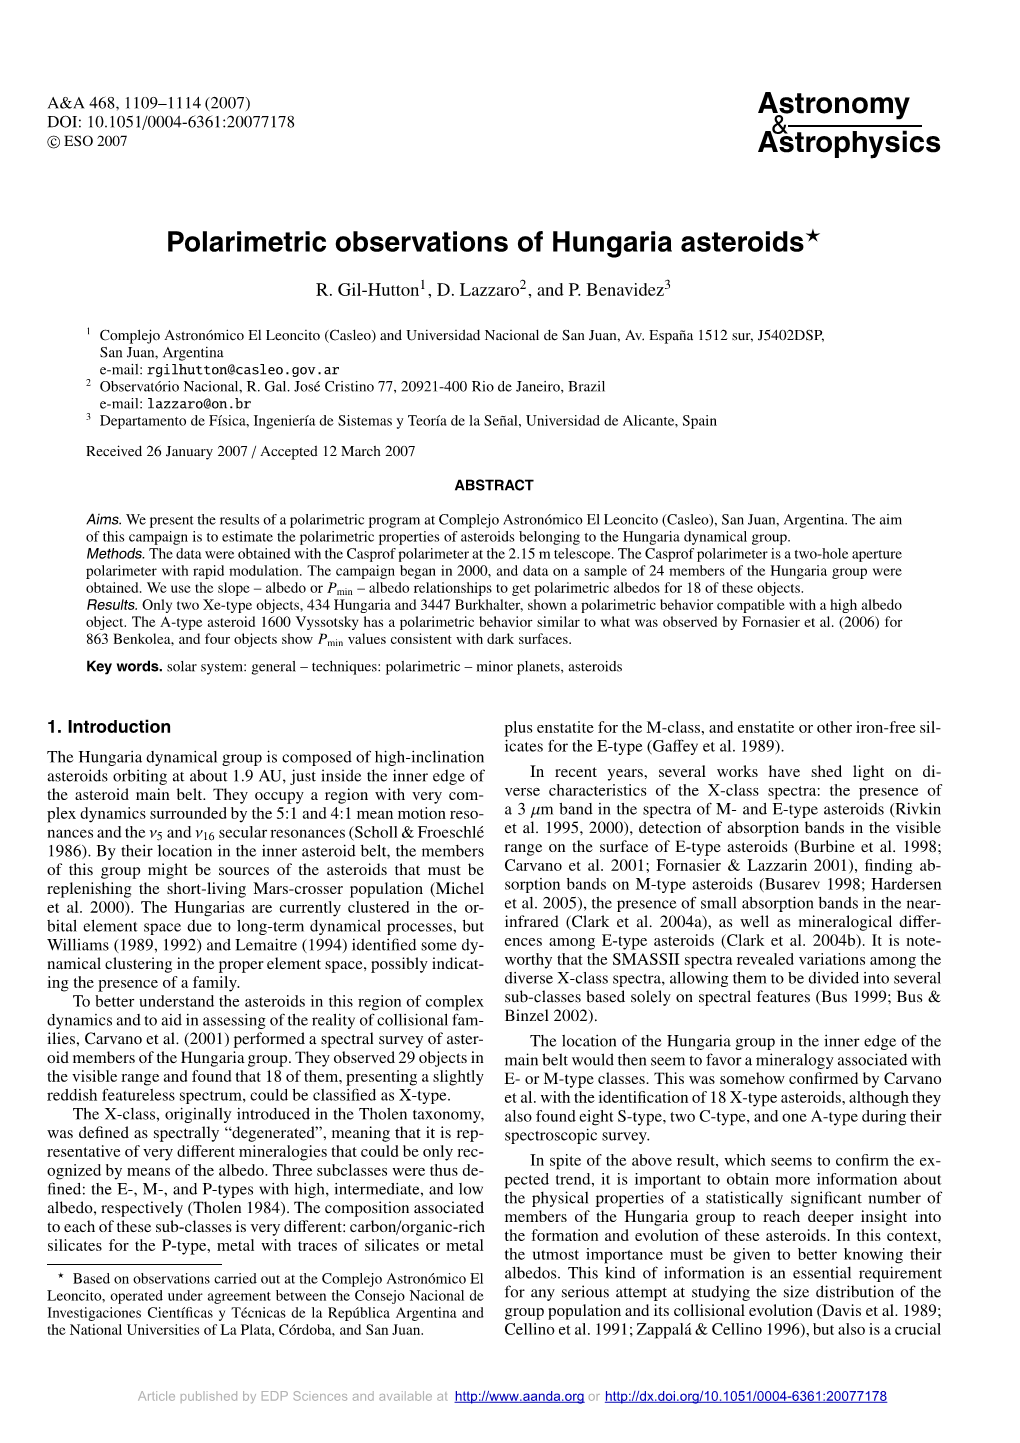 Polarimetric Observations of Hungaria Asteroids